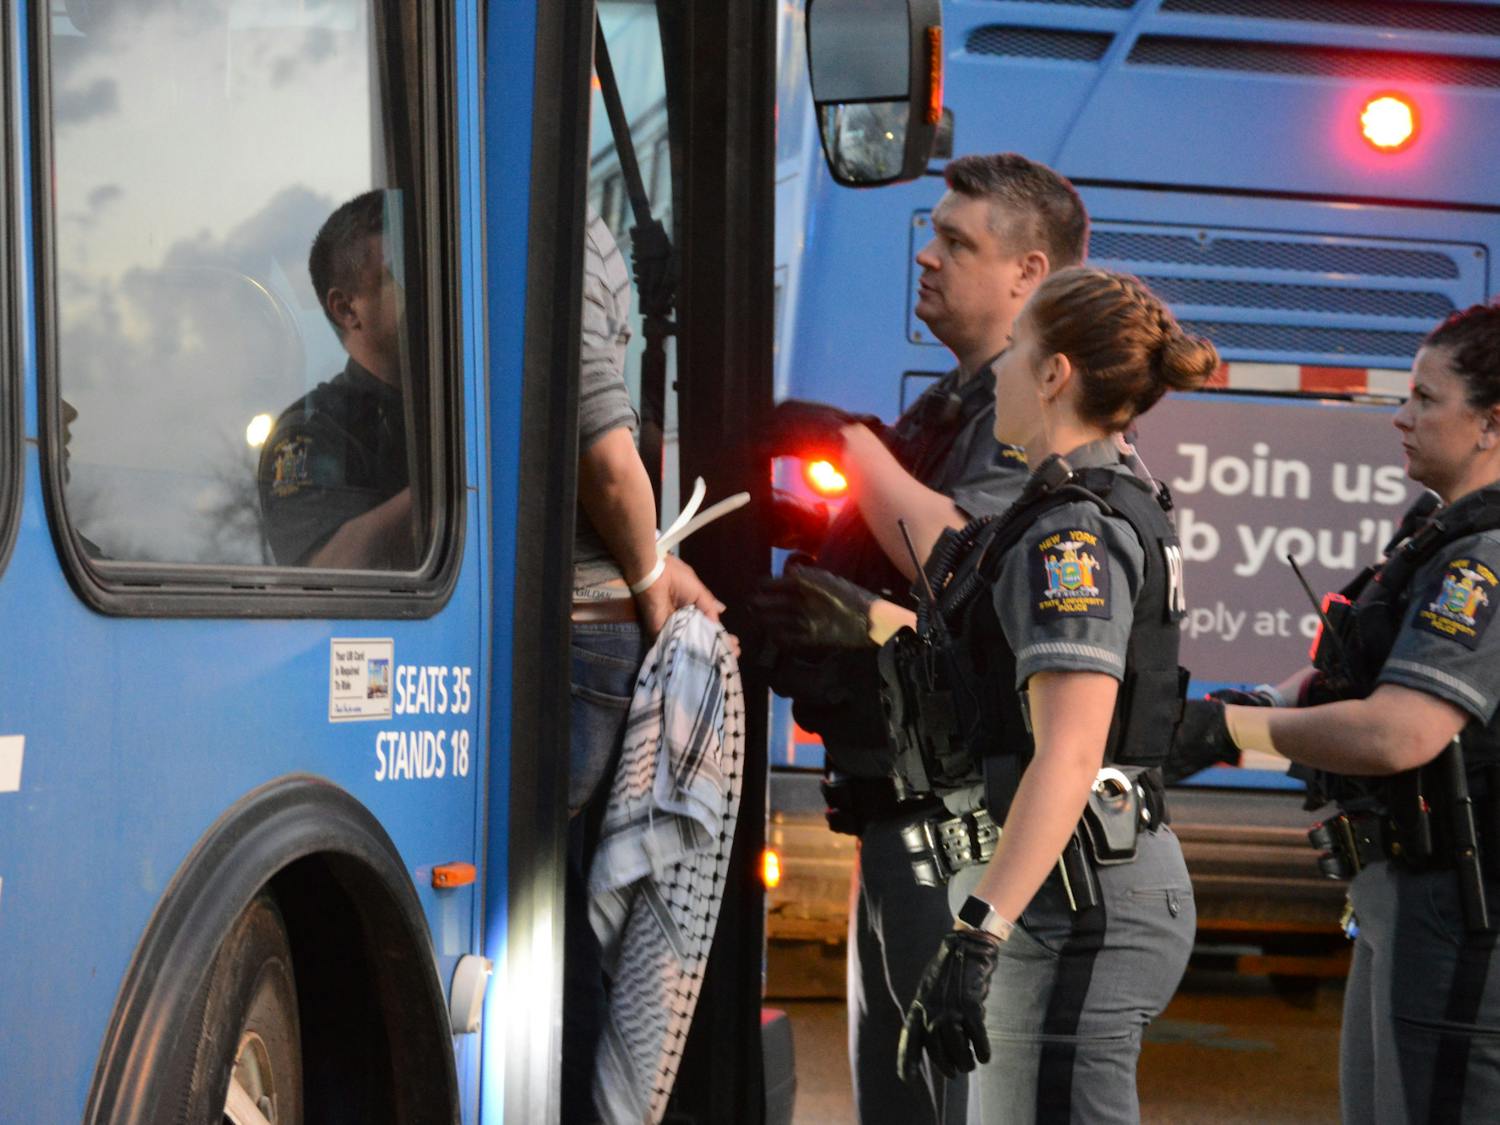 Several of the arrested protesters were transported off campus on a UB Stampede bus. About 10 demonstrators inside one bus could be heard chanting “free Palestine.”&nbsp;